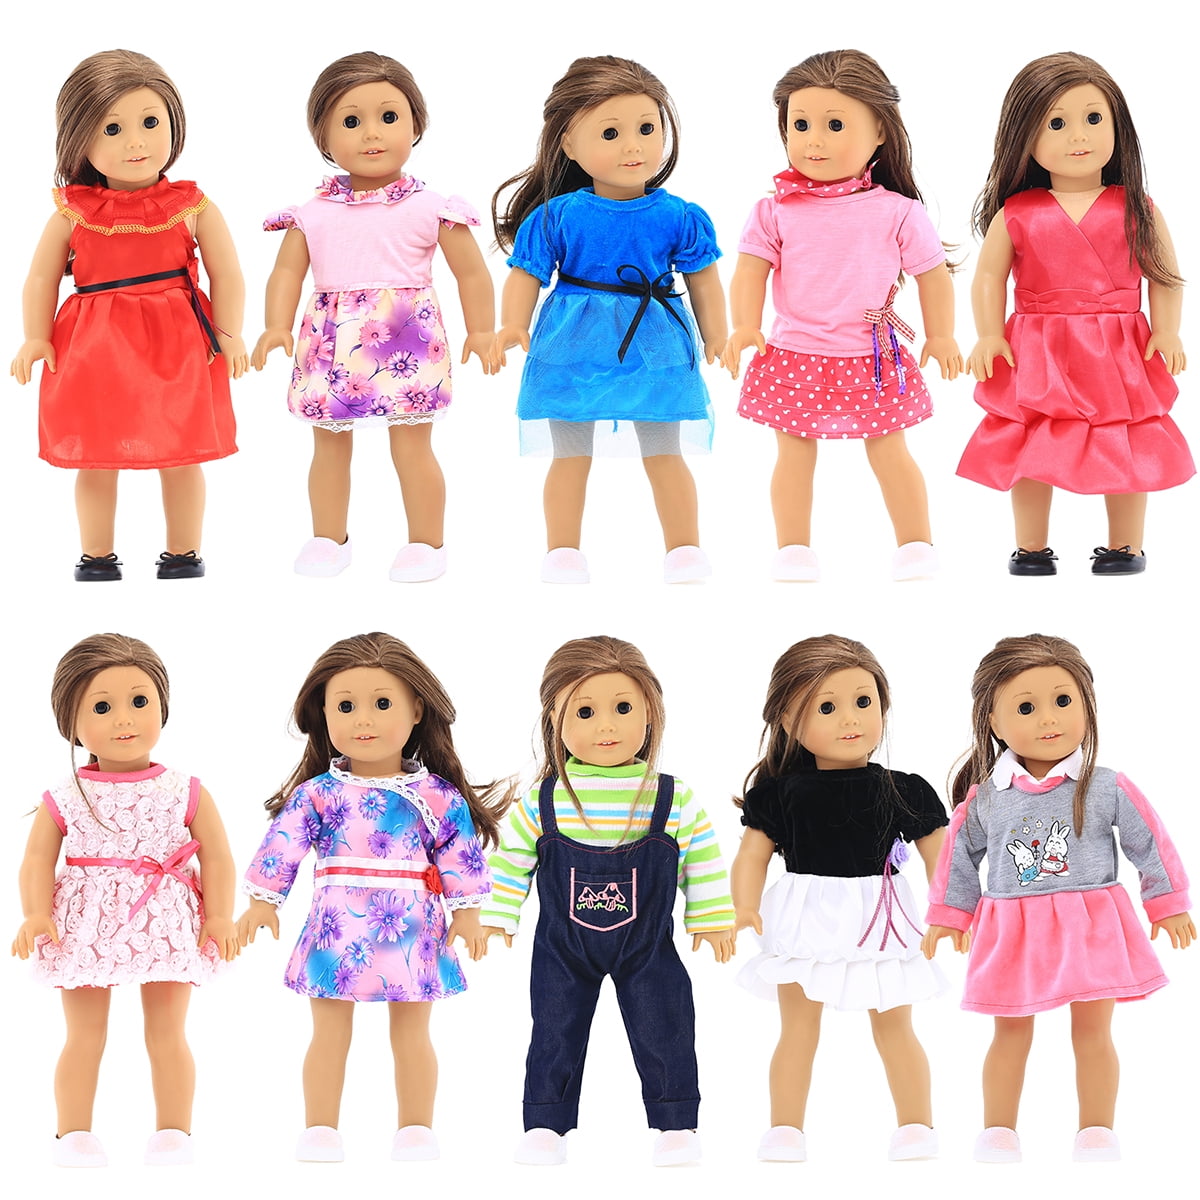 18 Doll Paris Glitter Dress Retro fits American girl my life our generation 